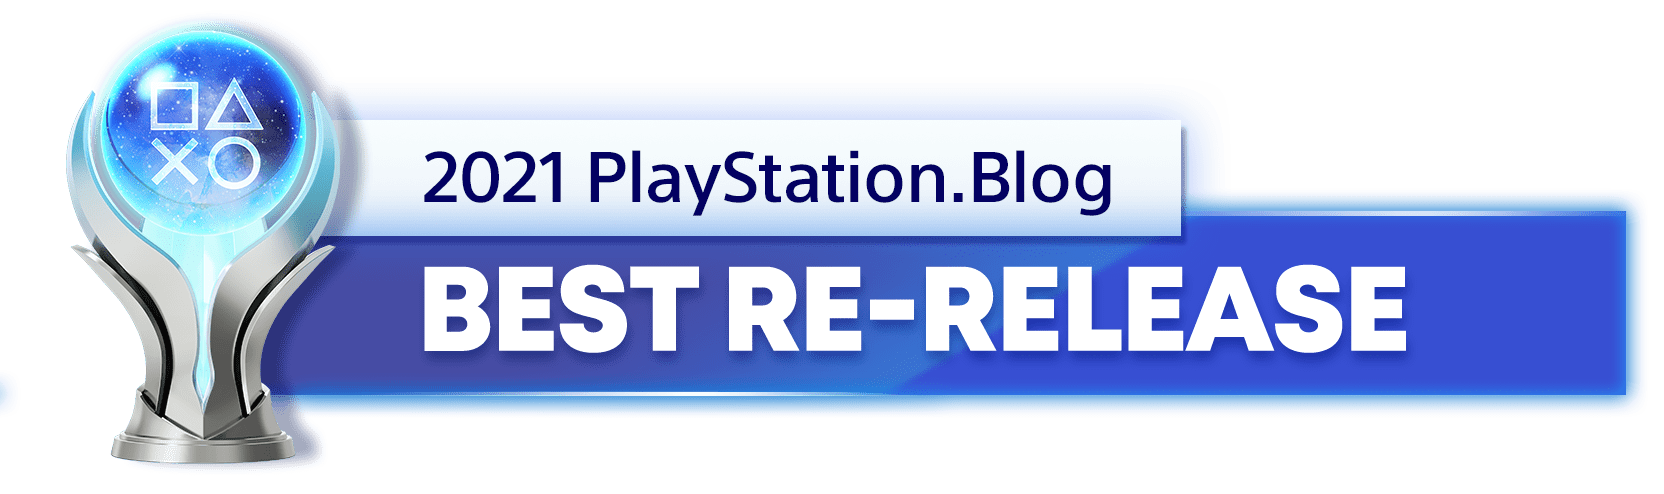 822c3b0363f0ec1cef1d6d8a7073c804f1faf59c - PS.Blog: Gewinner der Game of the Year Awards 2021